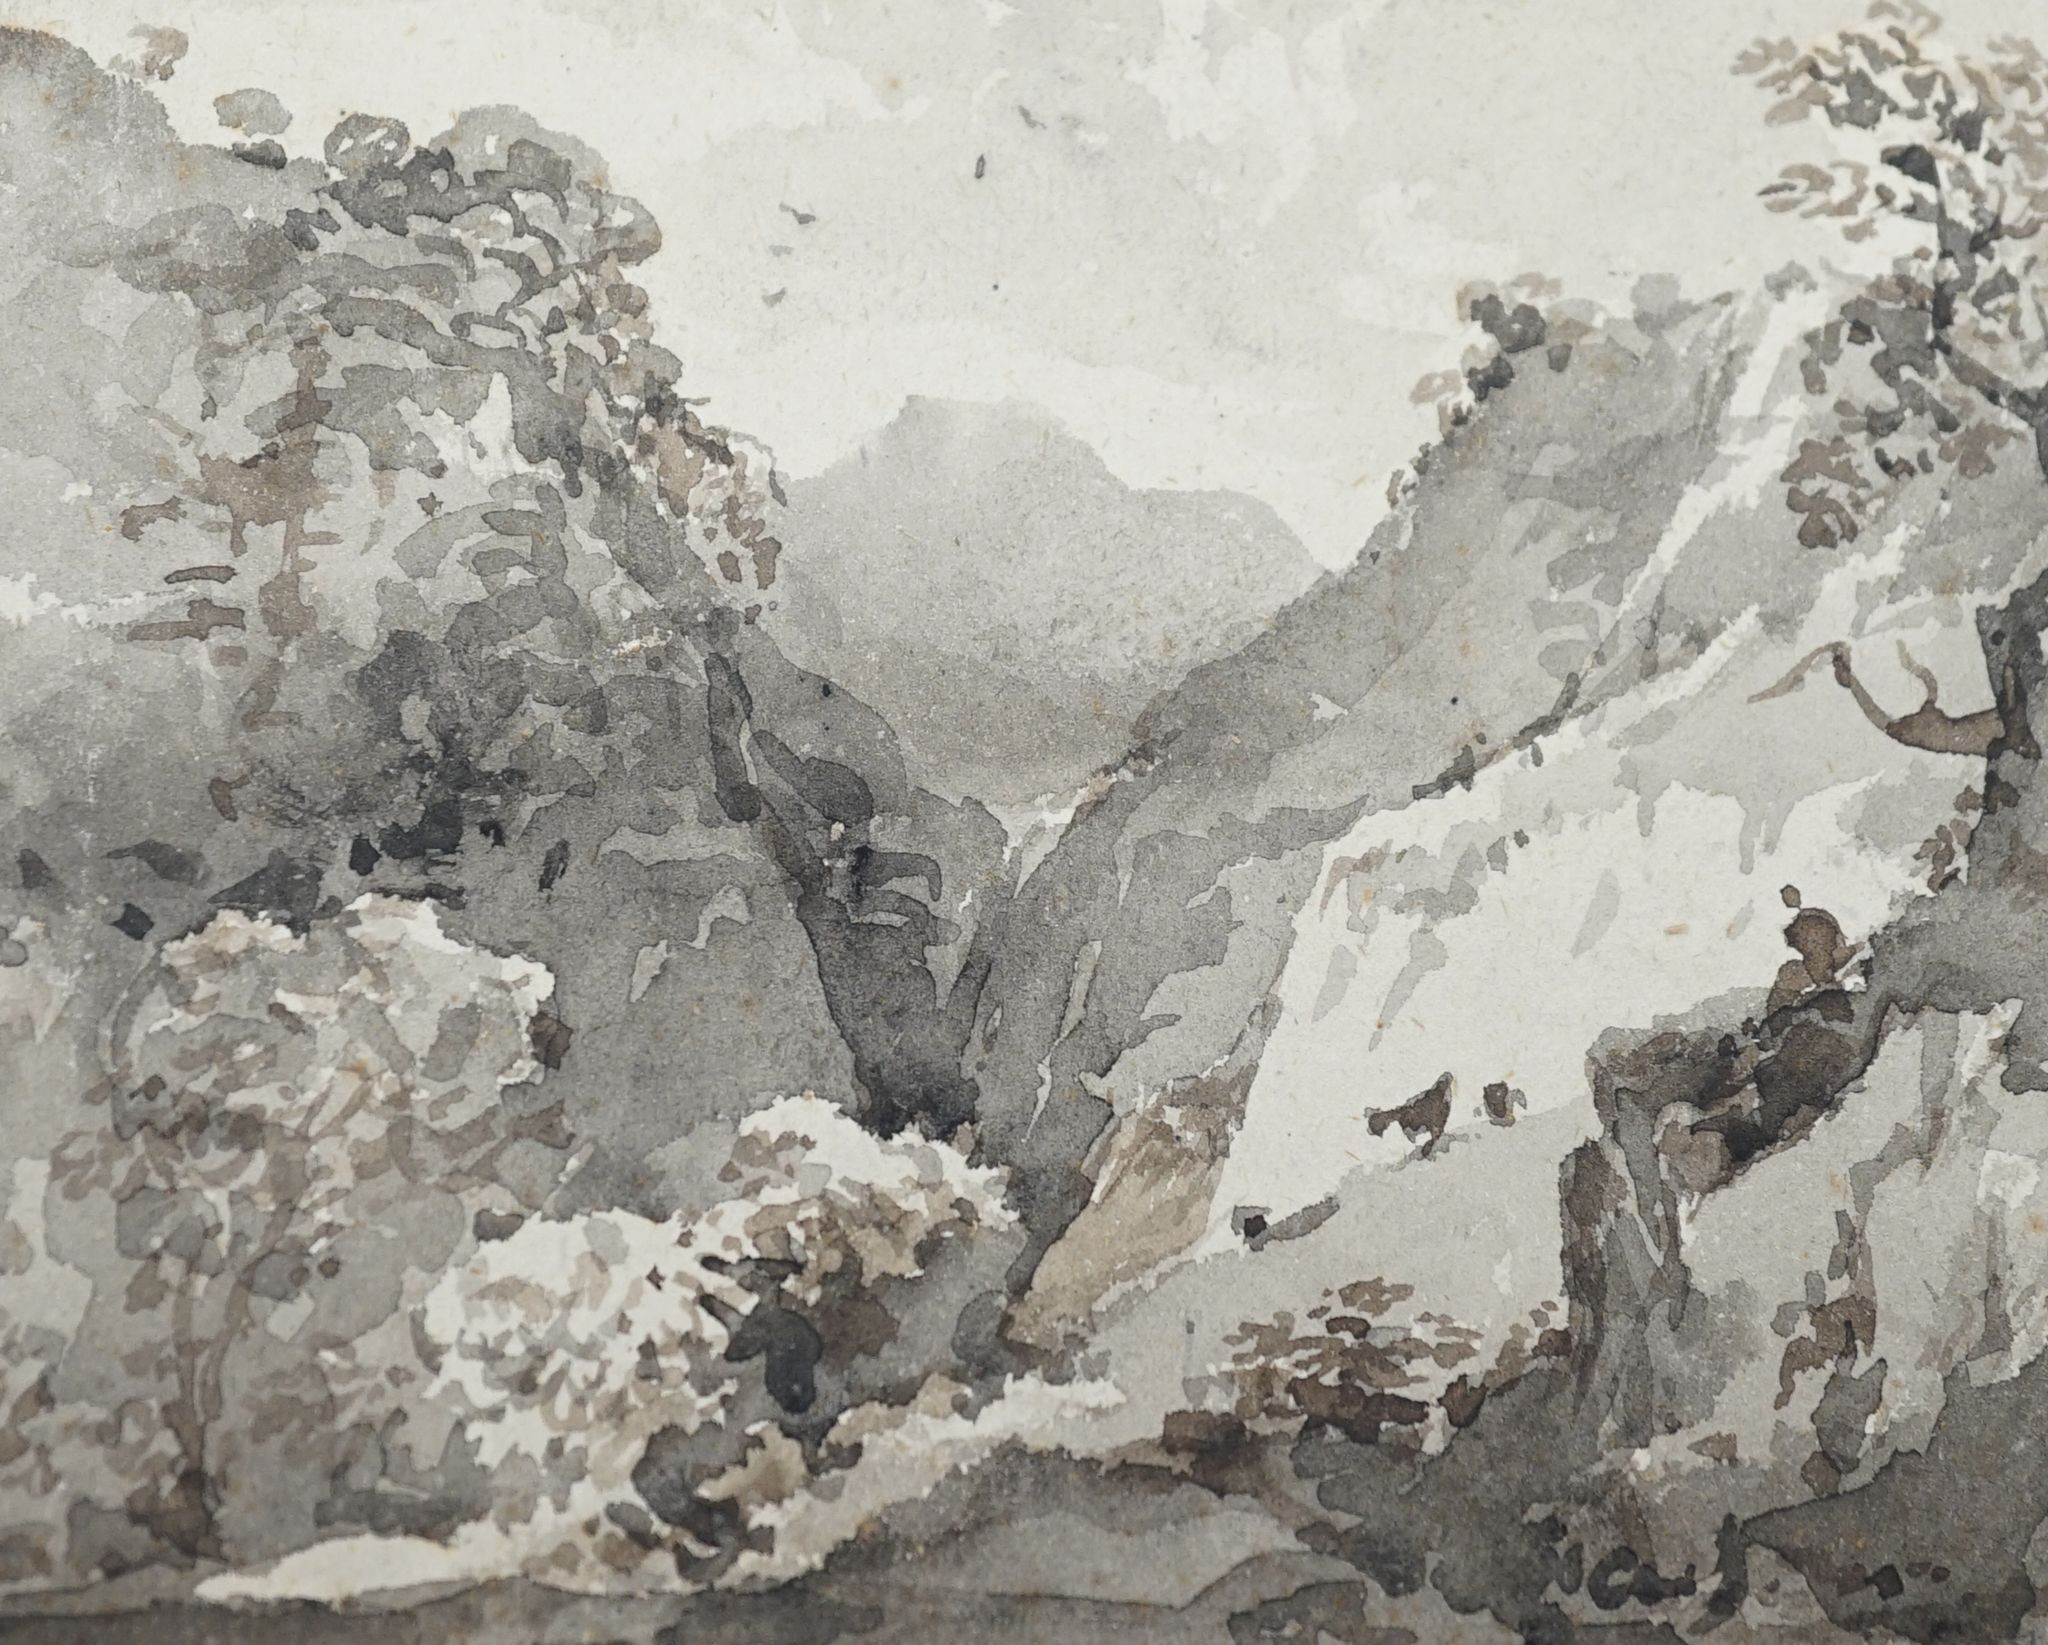 George Richard Vawser Snr. (1815-1888) - an album of 23 watercolour drawings, mainly monochrome landscapes, one signed and dated, 1830, largest 10 x 15cms.